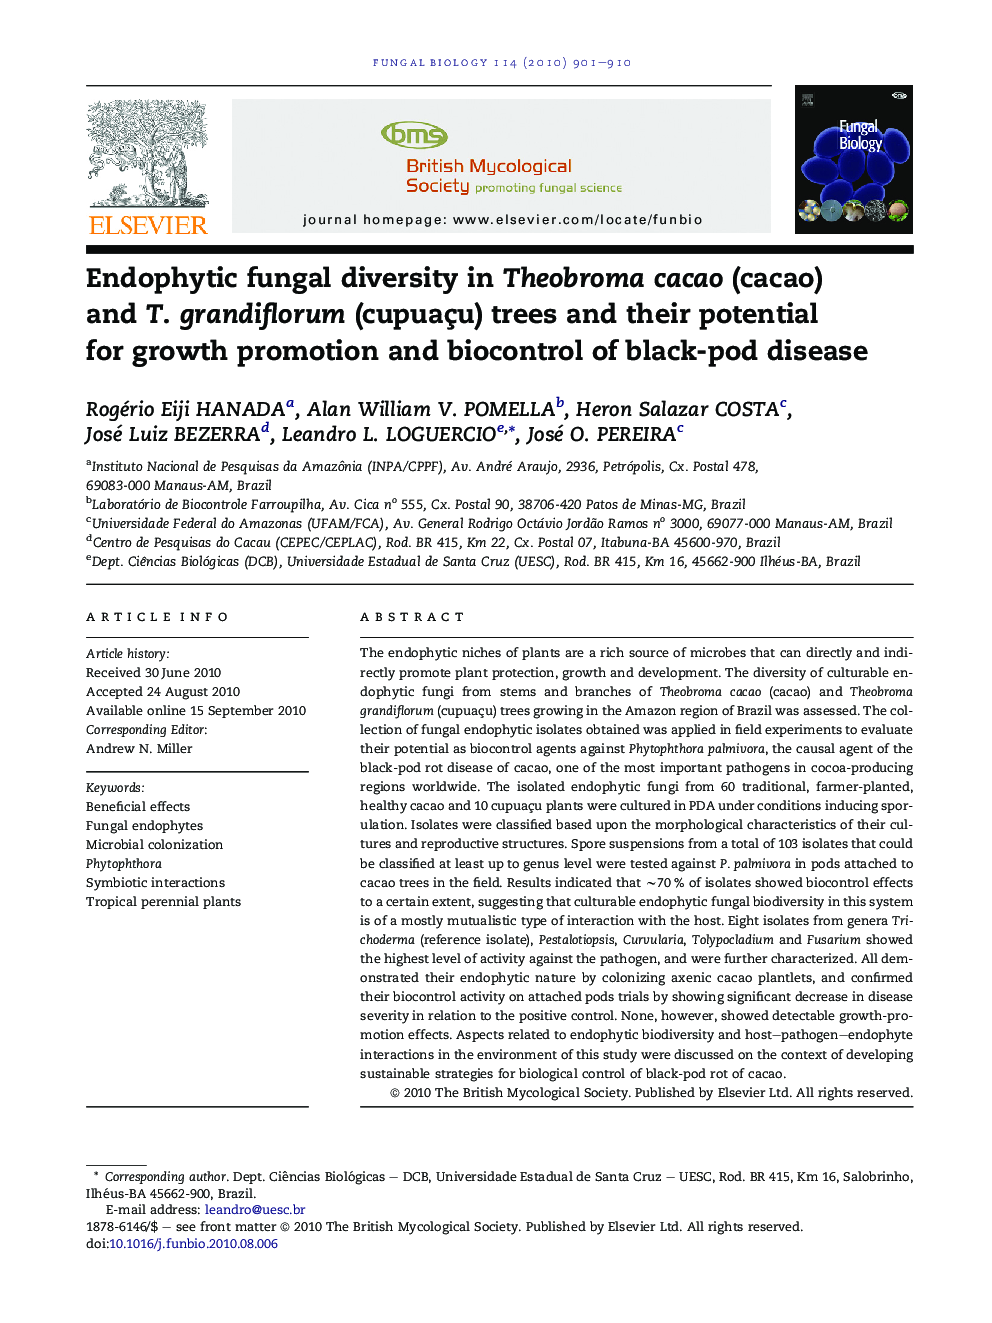 Endophytic fungal diversity in Theobroma cacao (cacao) and T. grandiflorum (cupuaçu) trees and their potential for growth promotion and biocontrol of black-pod disease